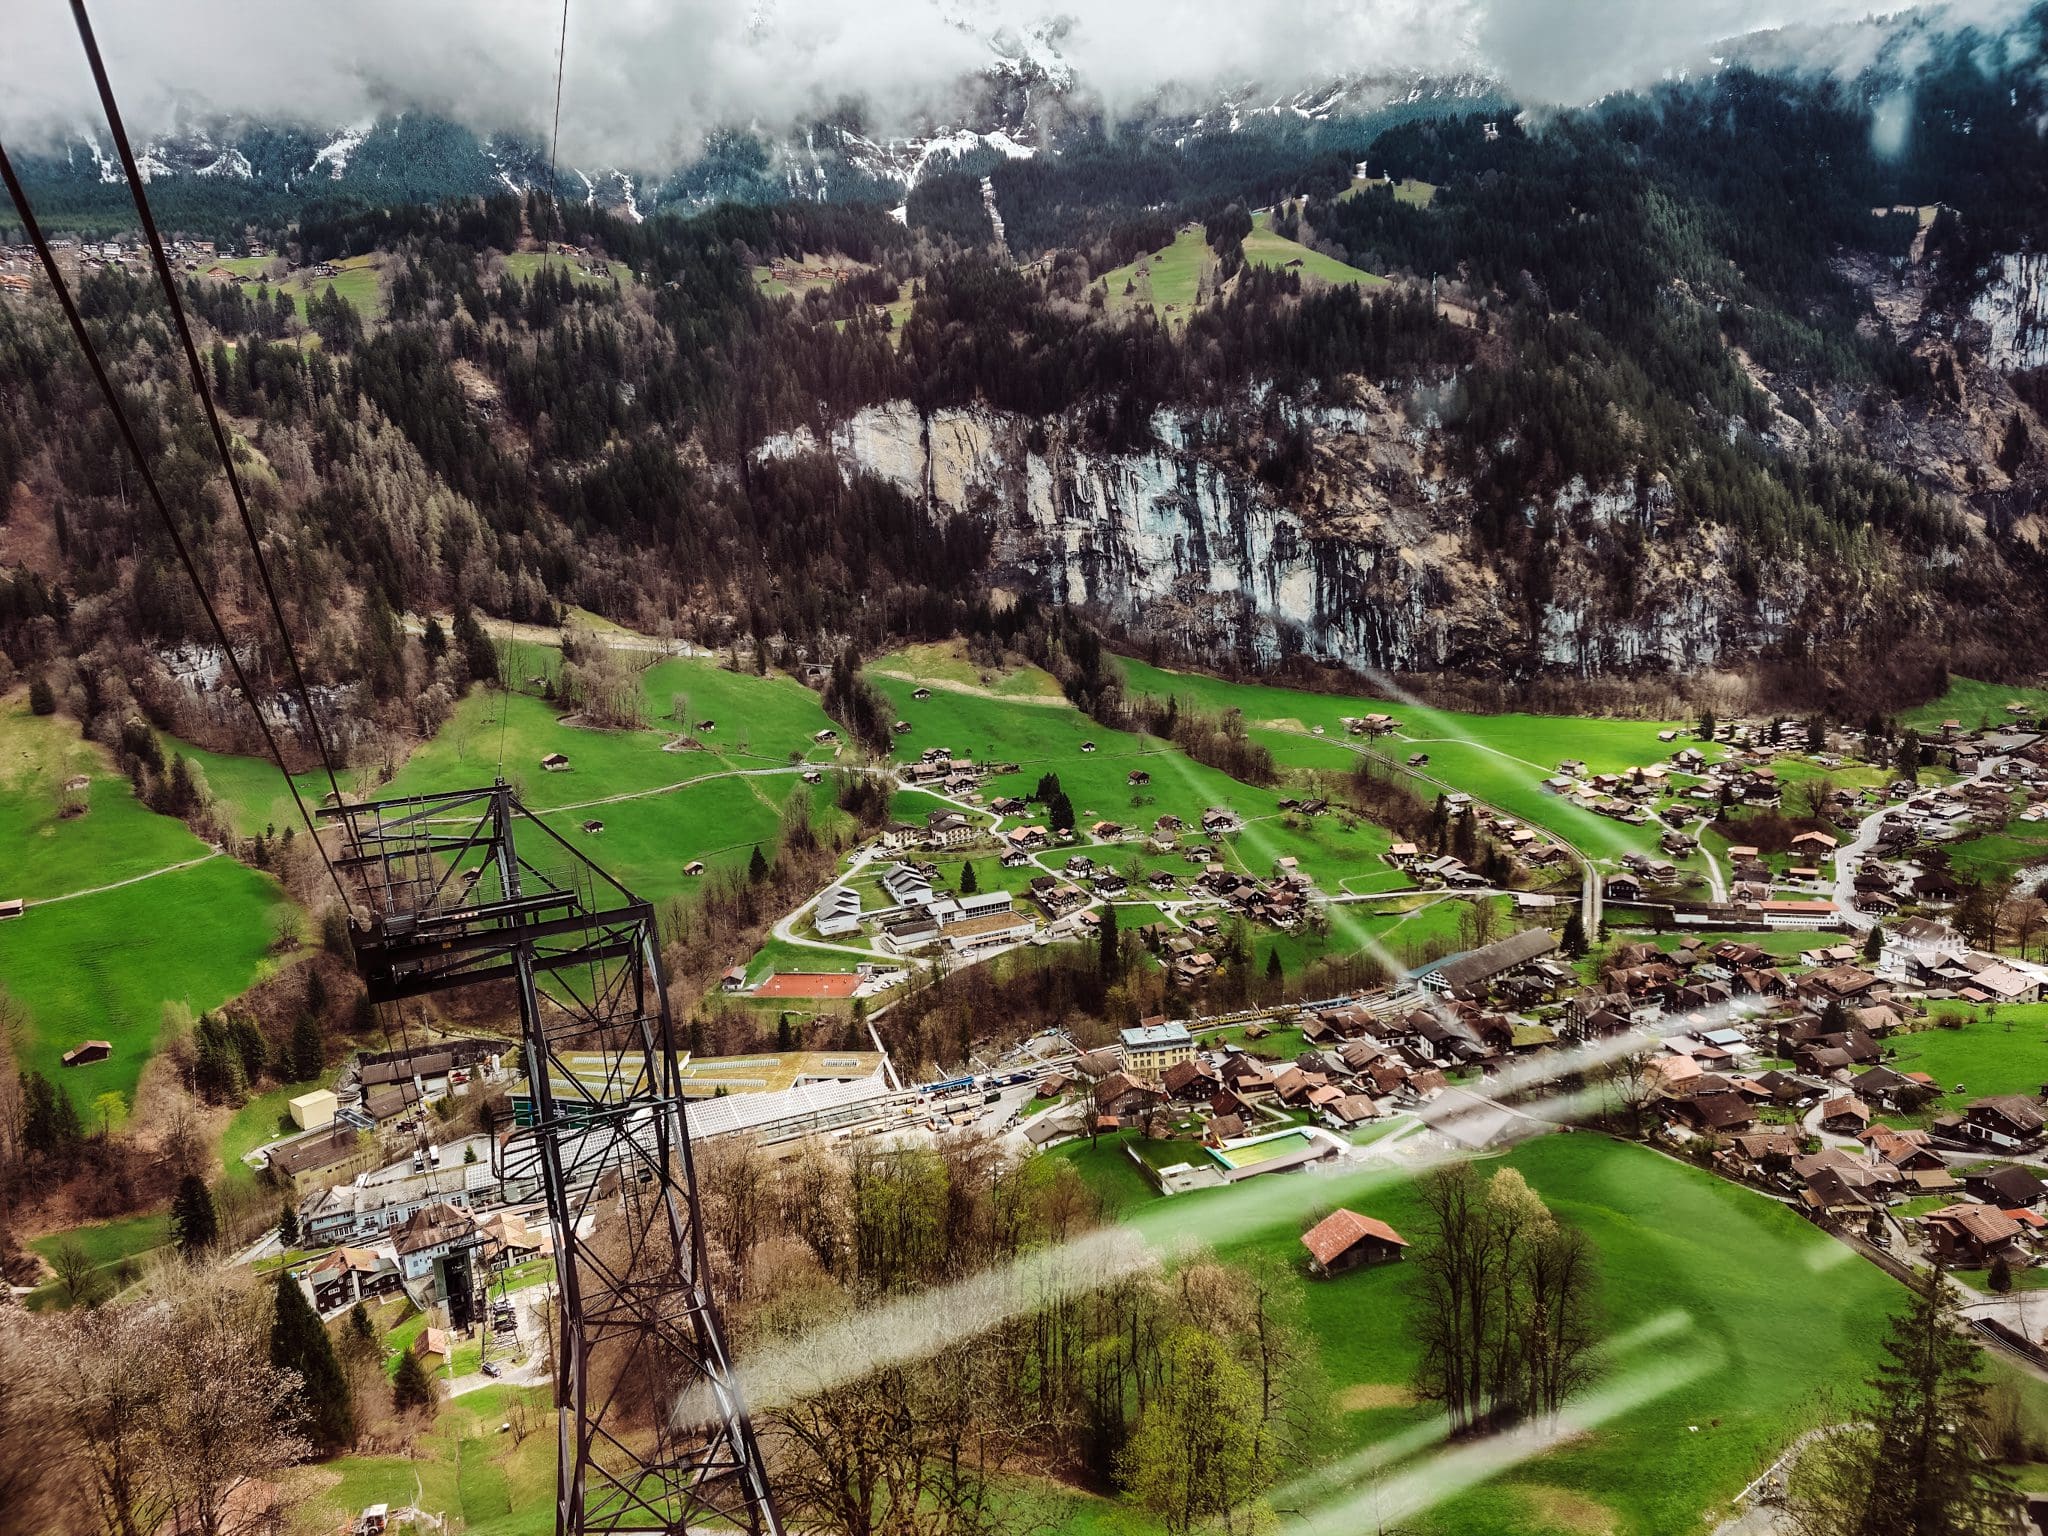 views of Lauterbrunnen as we come down the Cable car from Murren